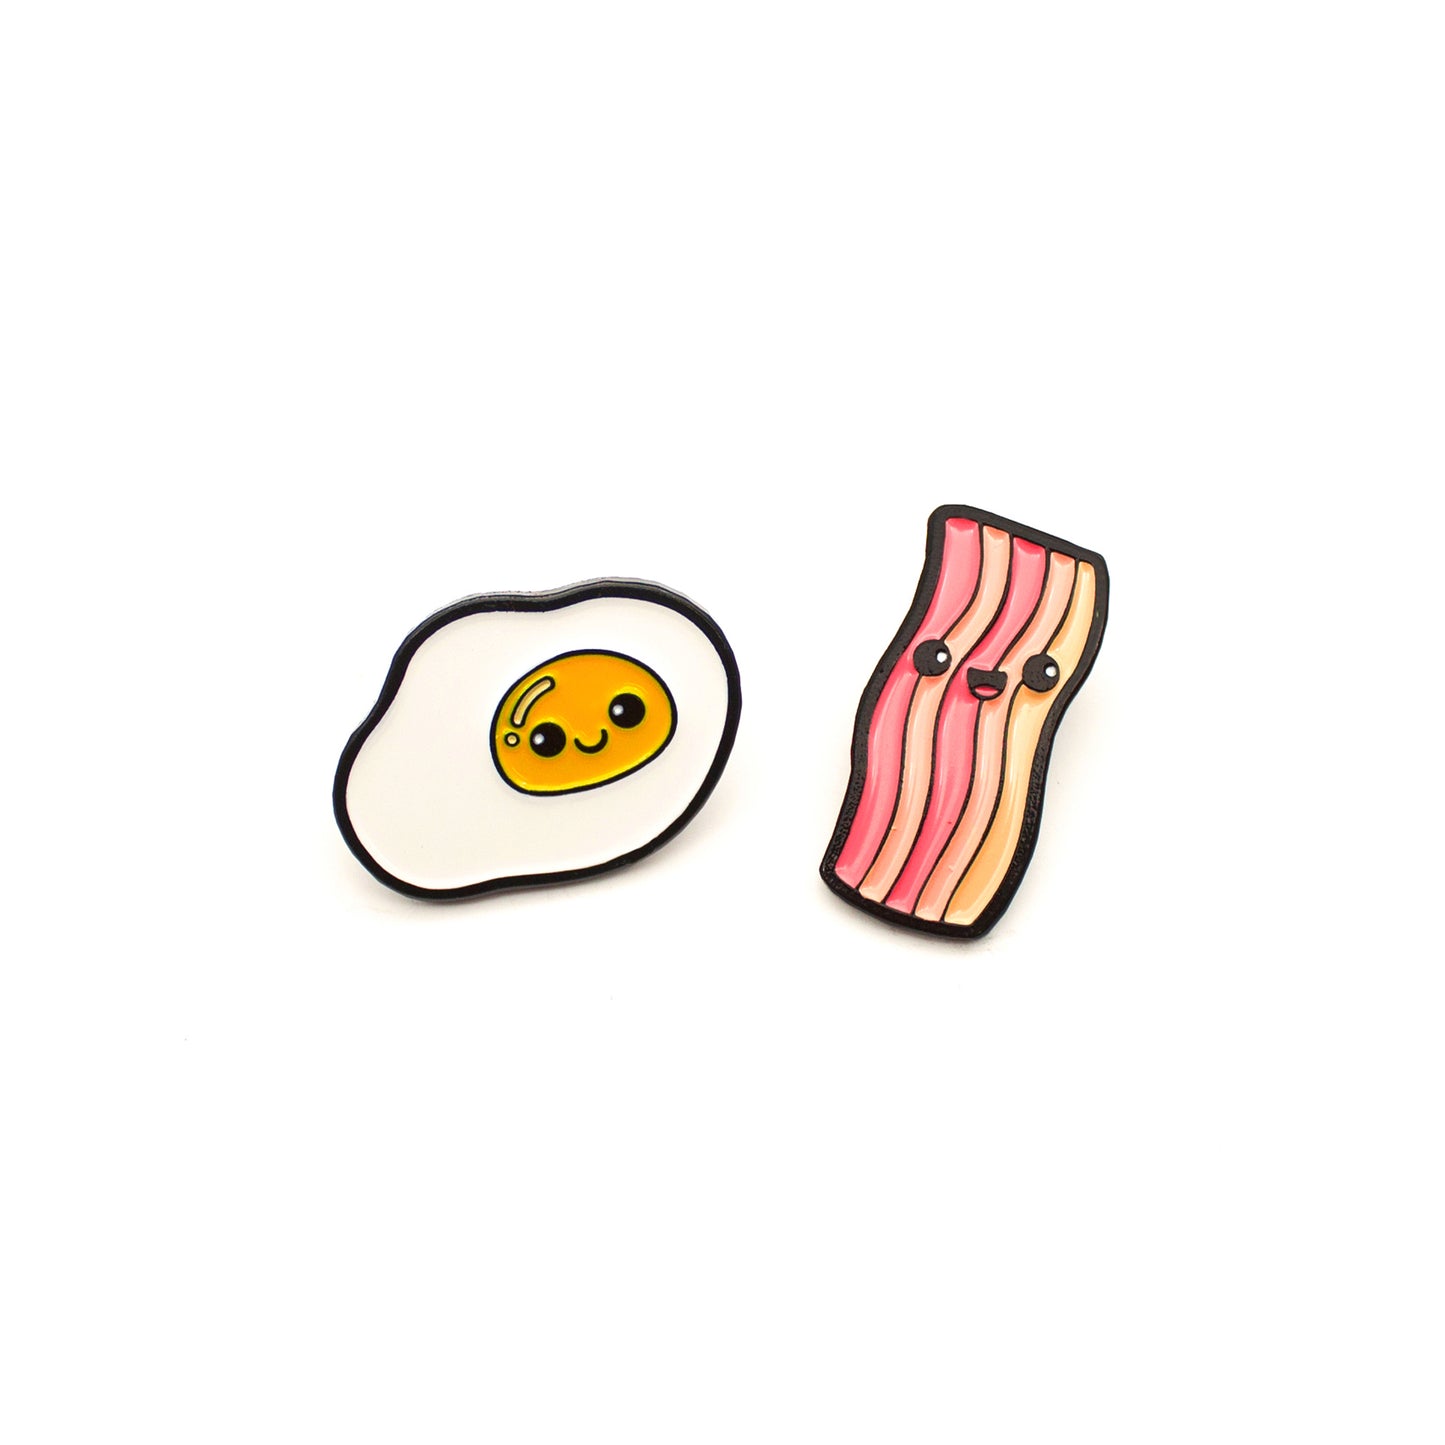 Pin Pin Pals Egg and Bacon enamel pin set on white background